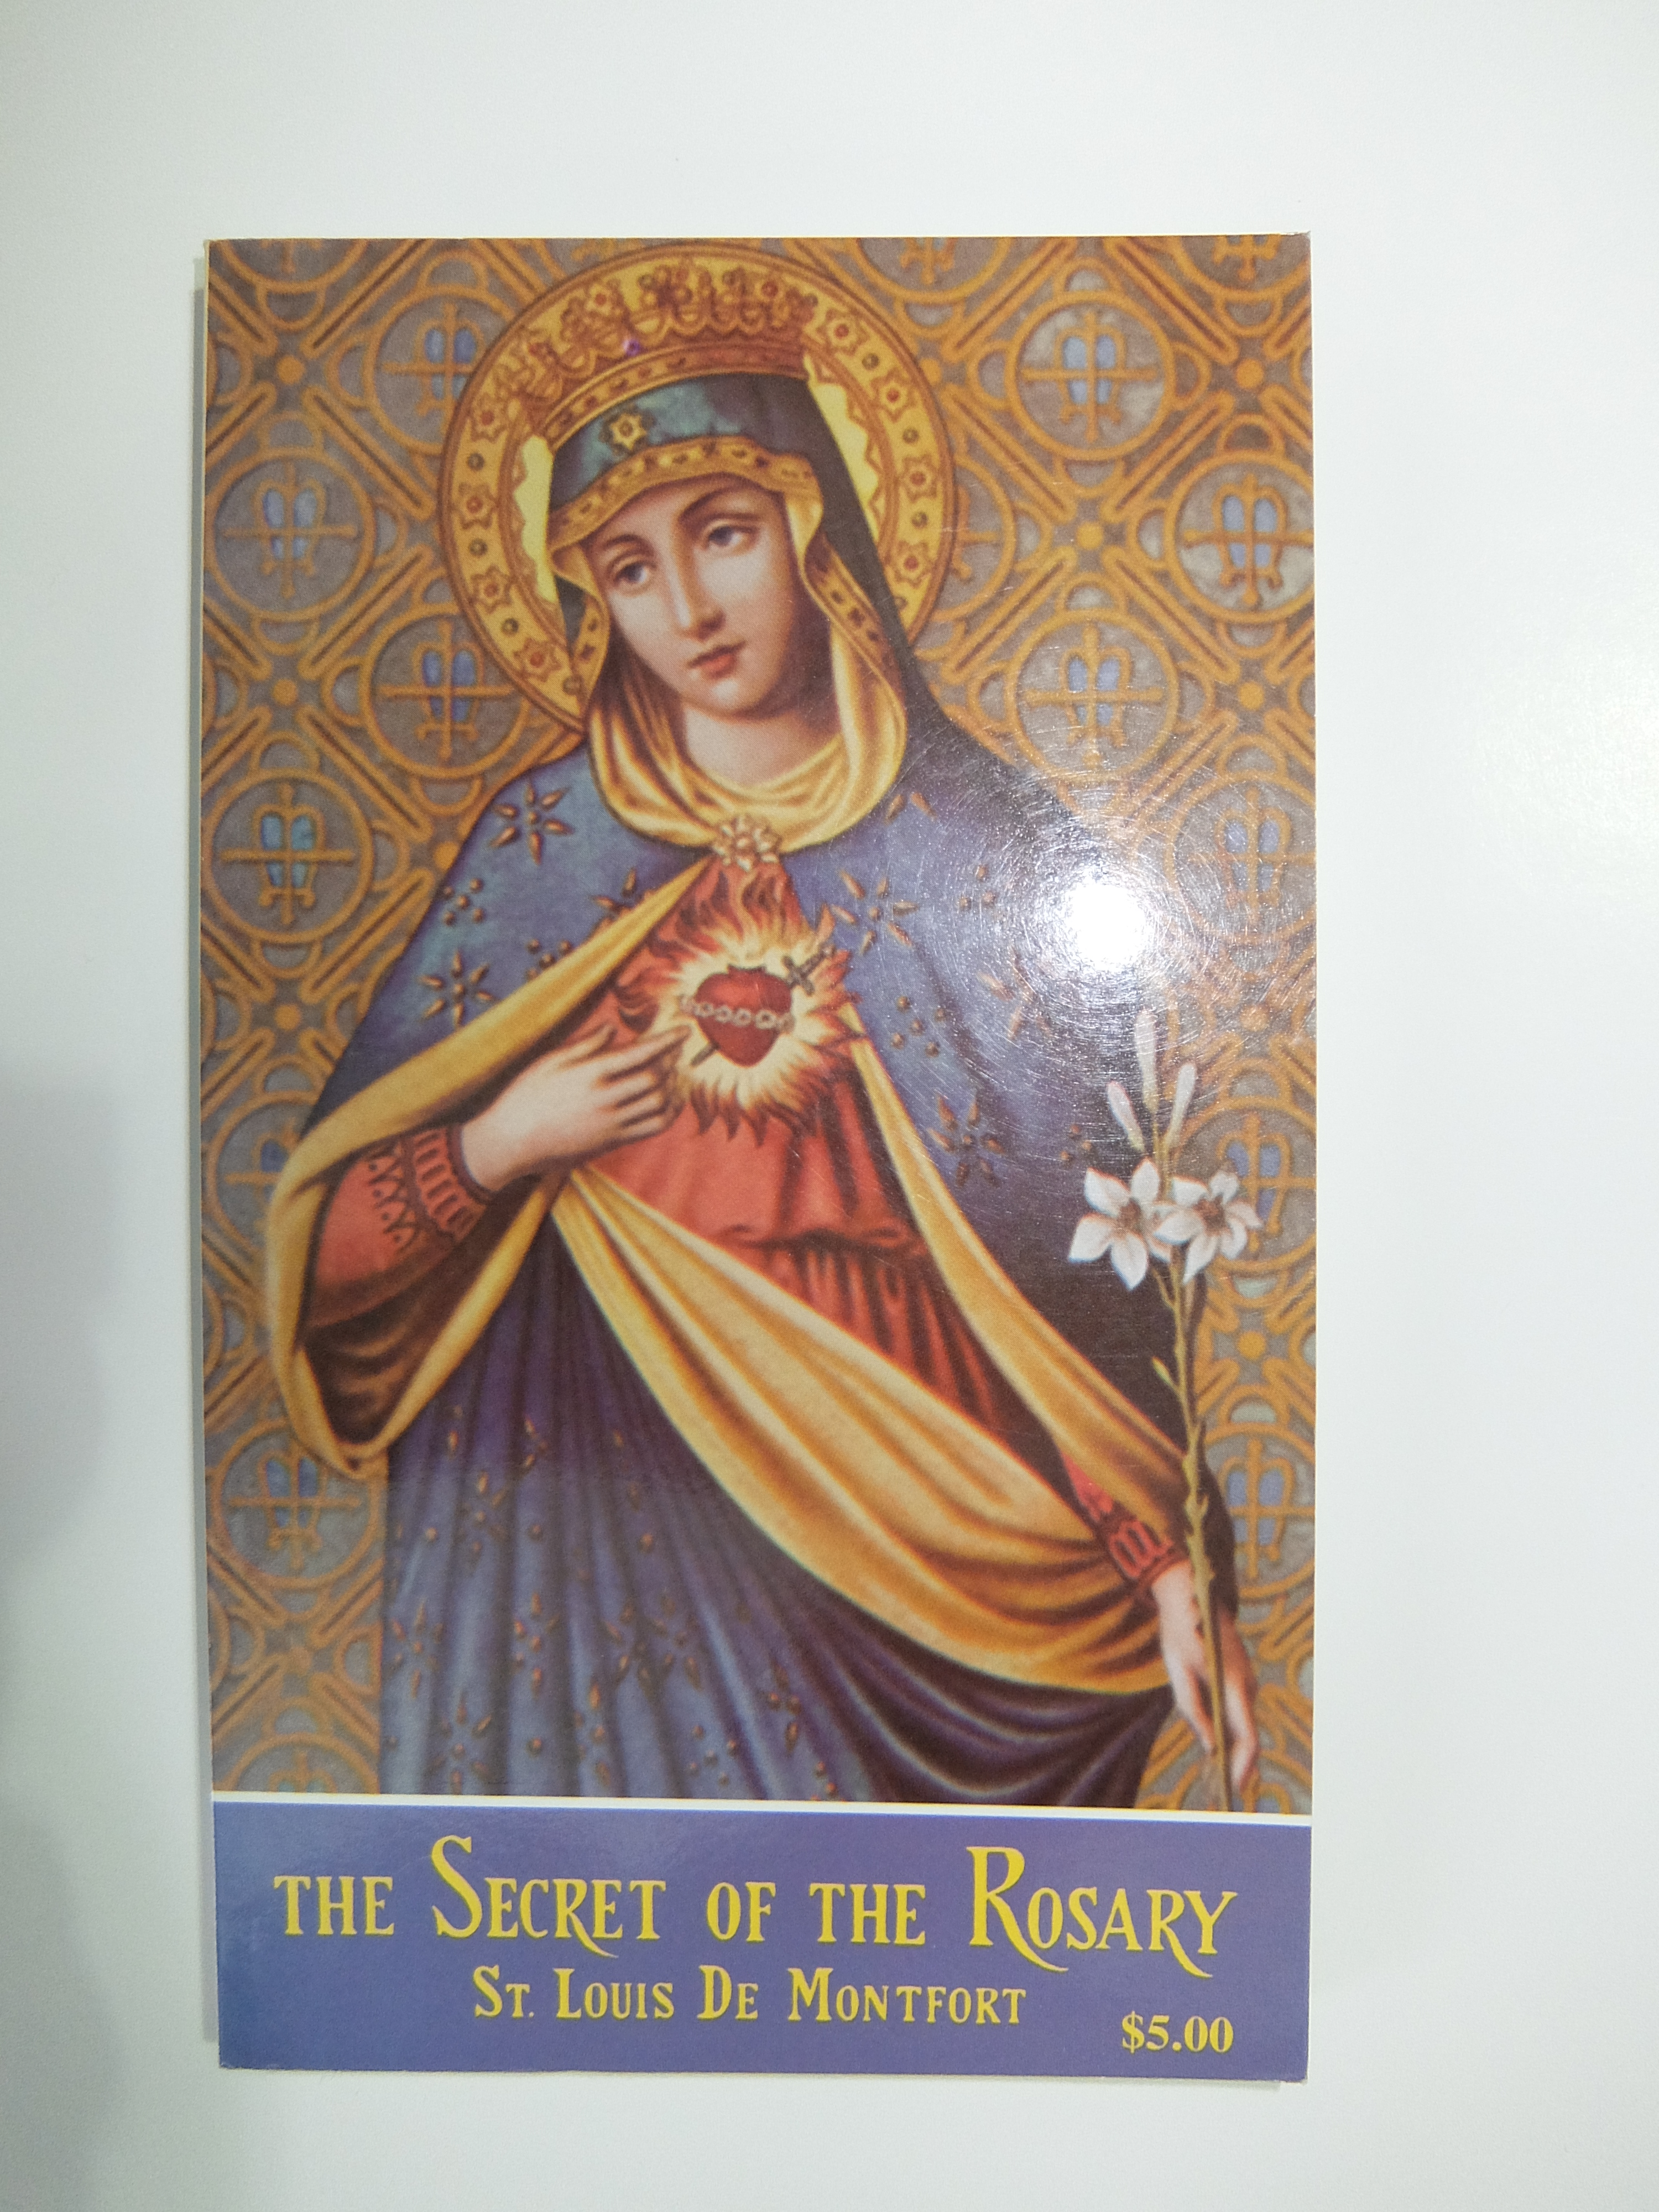 The Secret of the Rosary Image